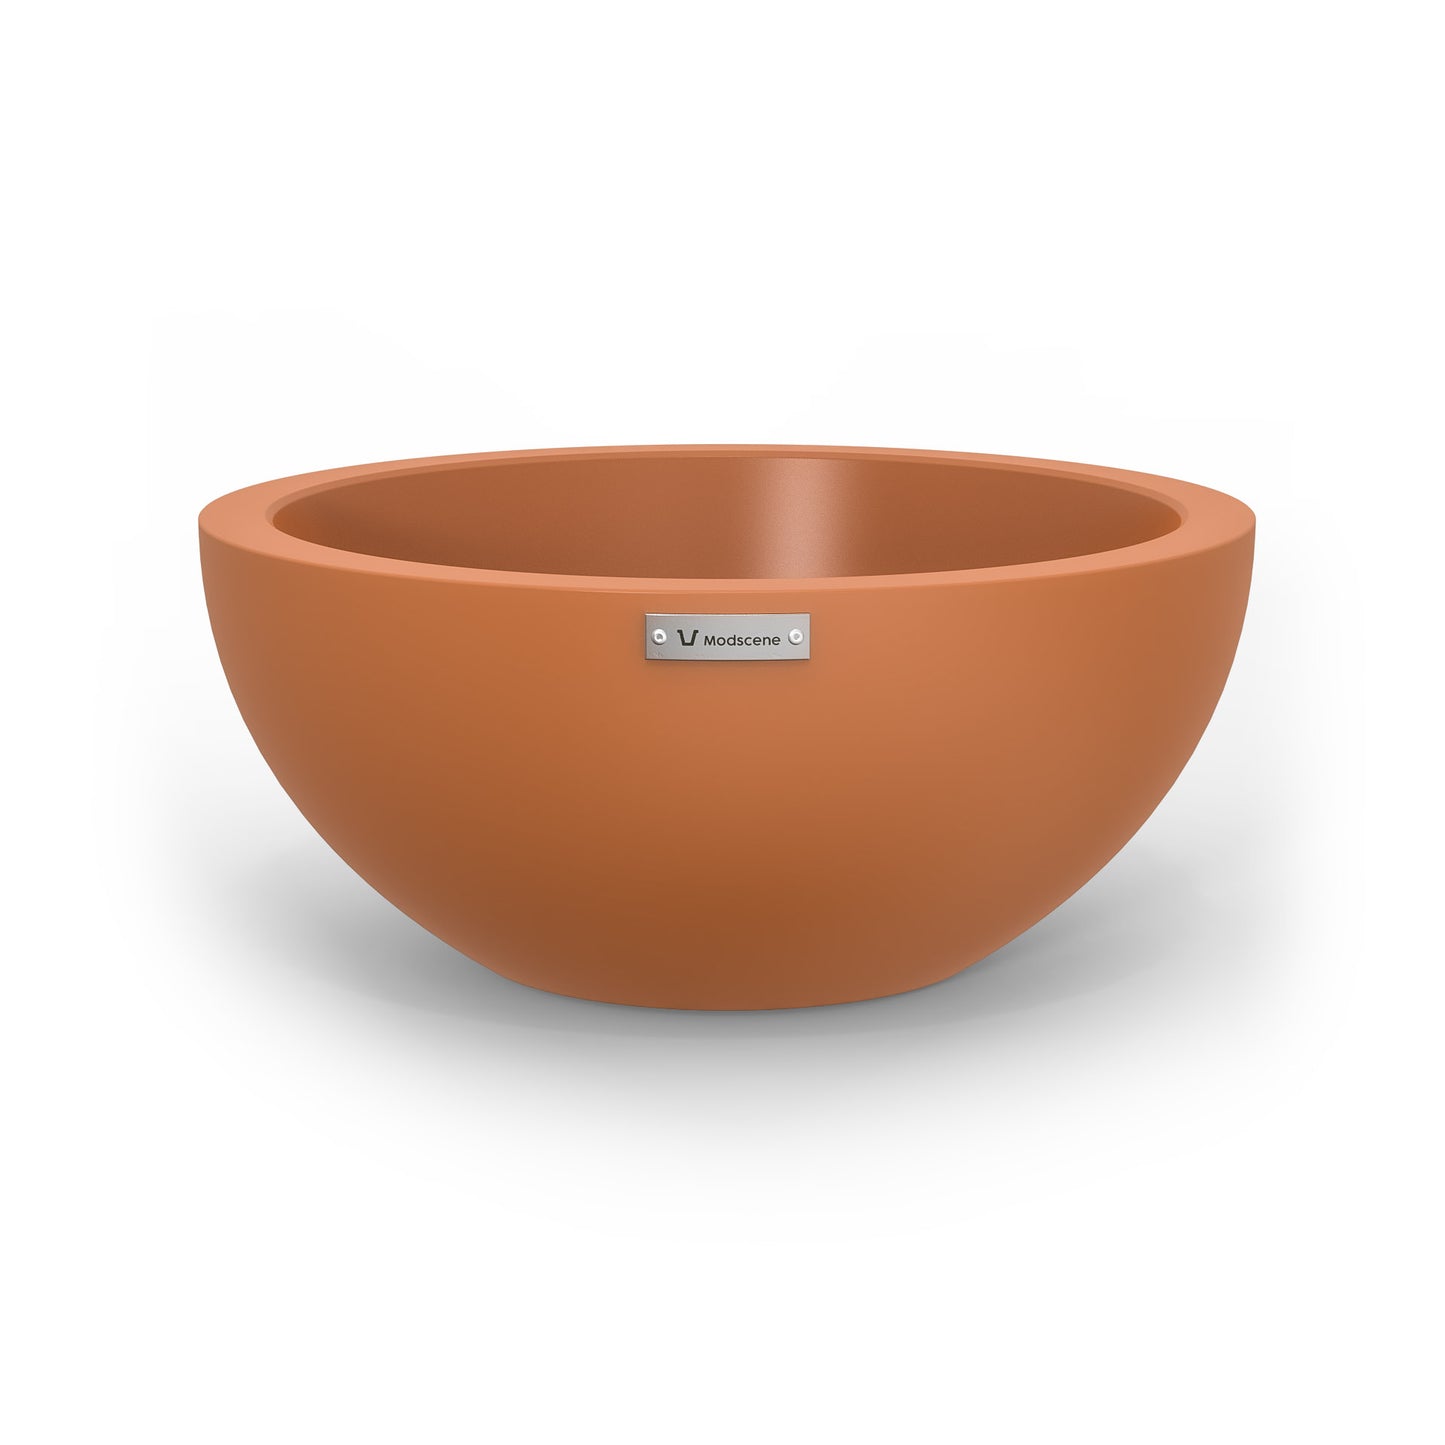 A small planter bowl in a terracotta colour made by Modscene.